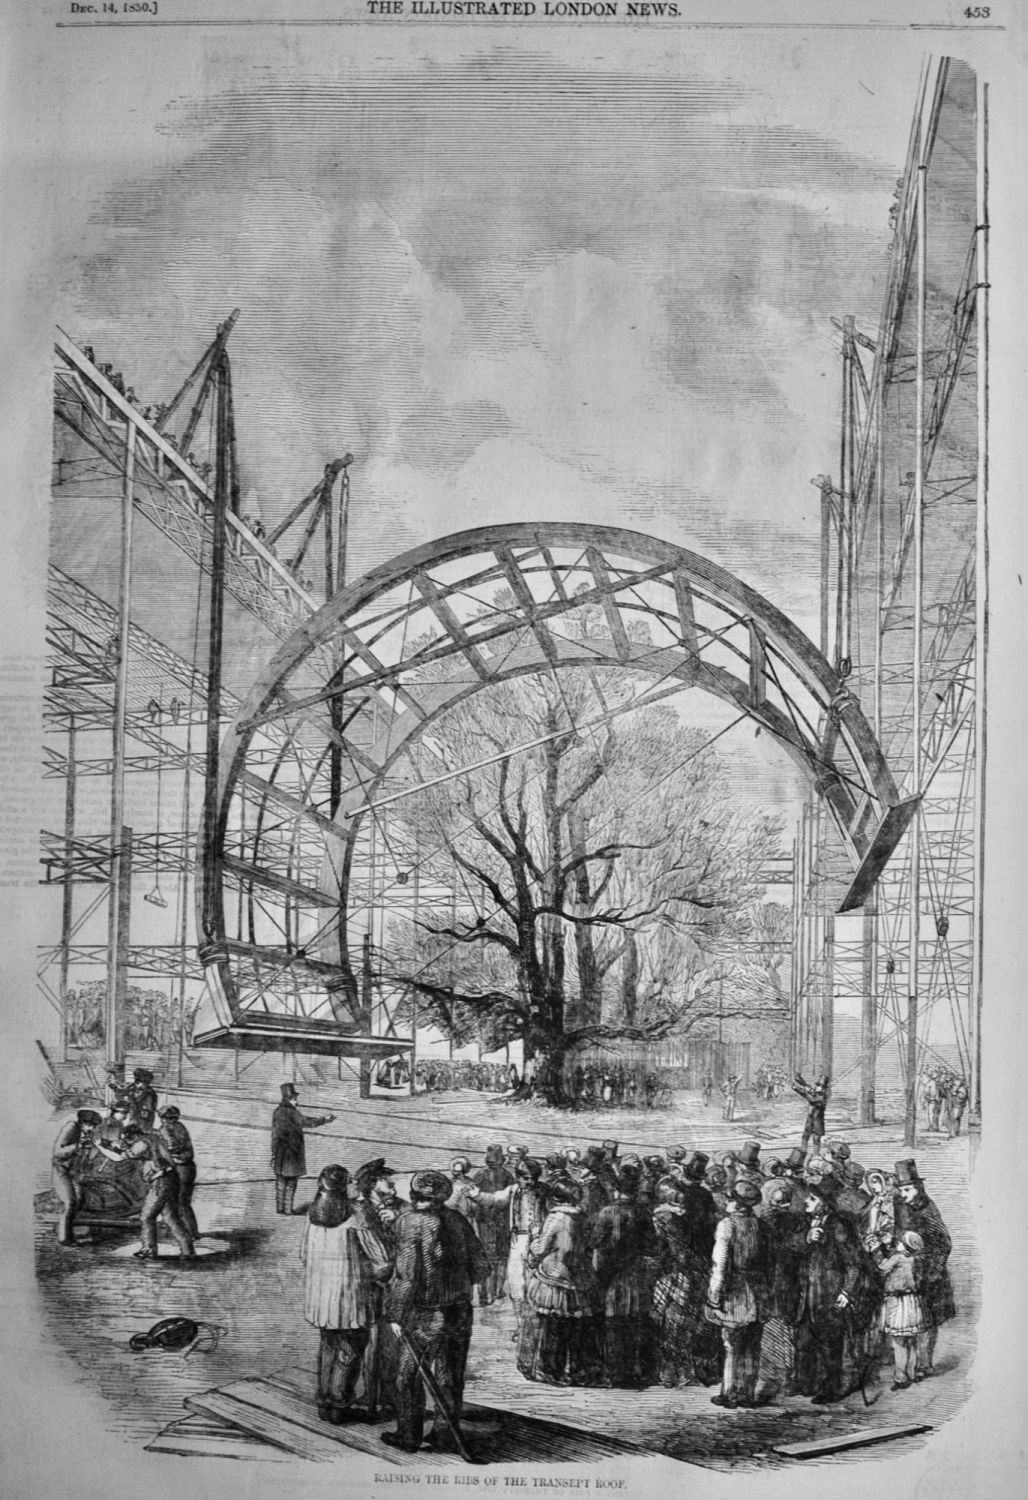 The Great Exhibition of 1851.:  Raising the Ribs of the Transept Roof.  185